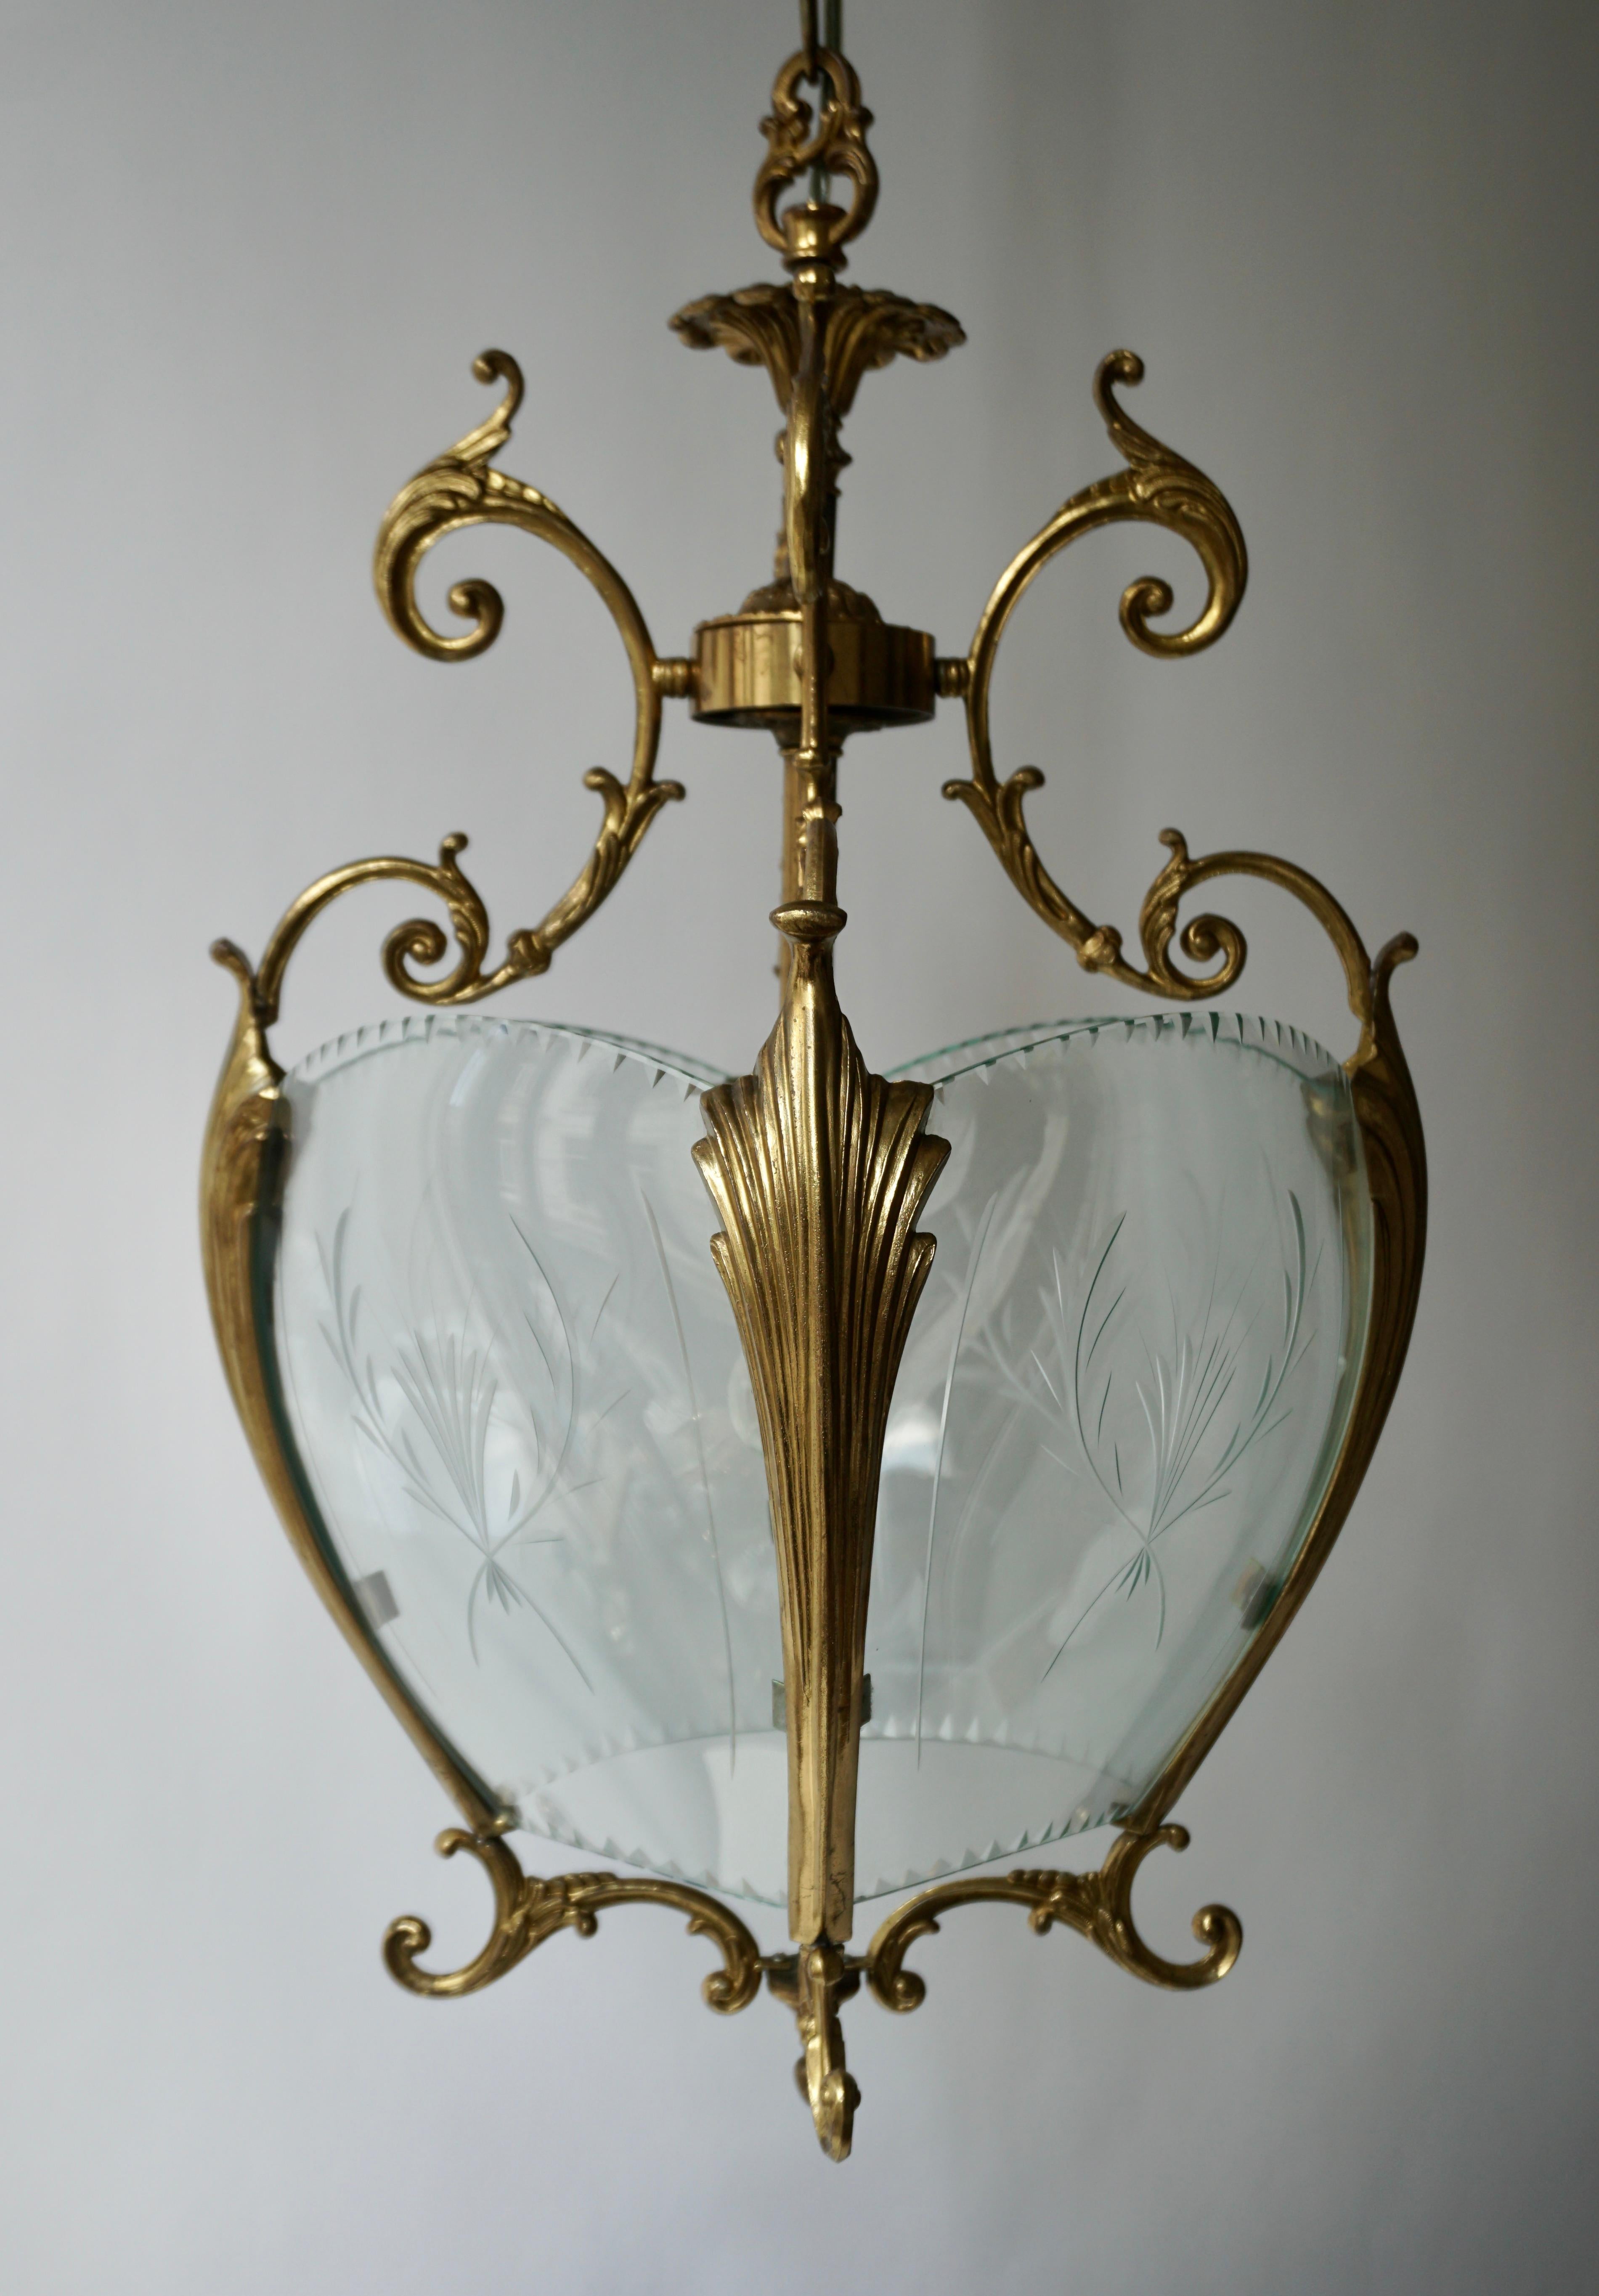 Hollywood Regency Gold Bronze Hall Lantern with Finely Cut Glass, circa 1950s For Sale